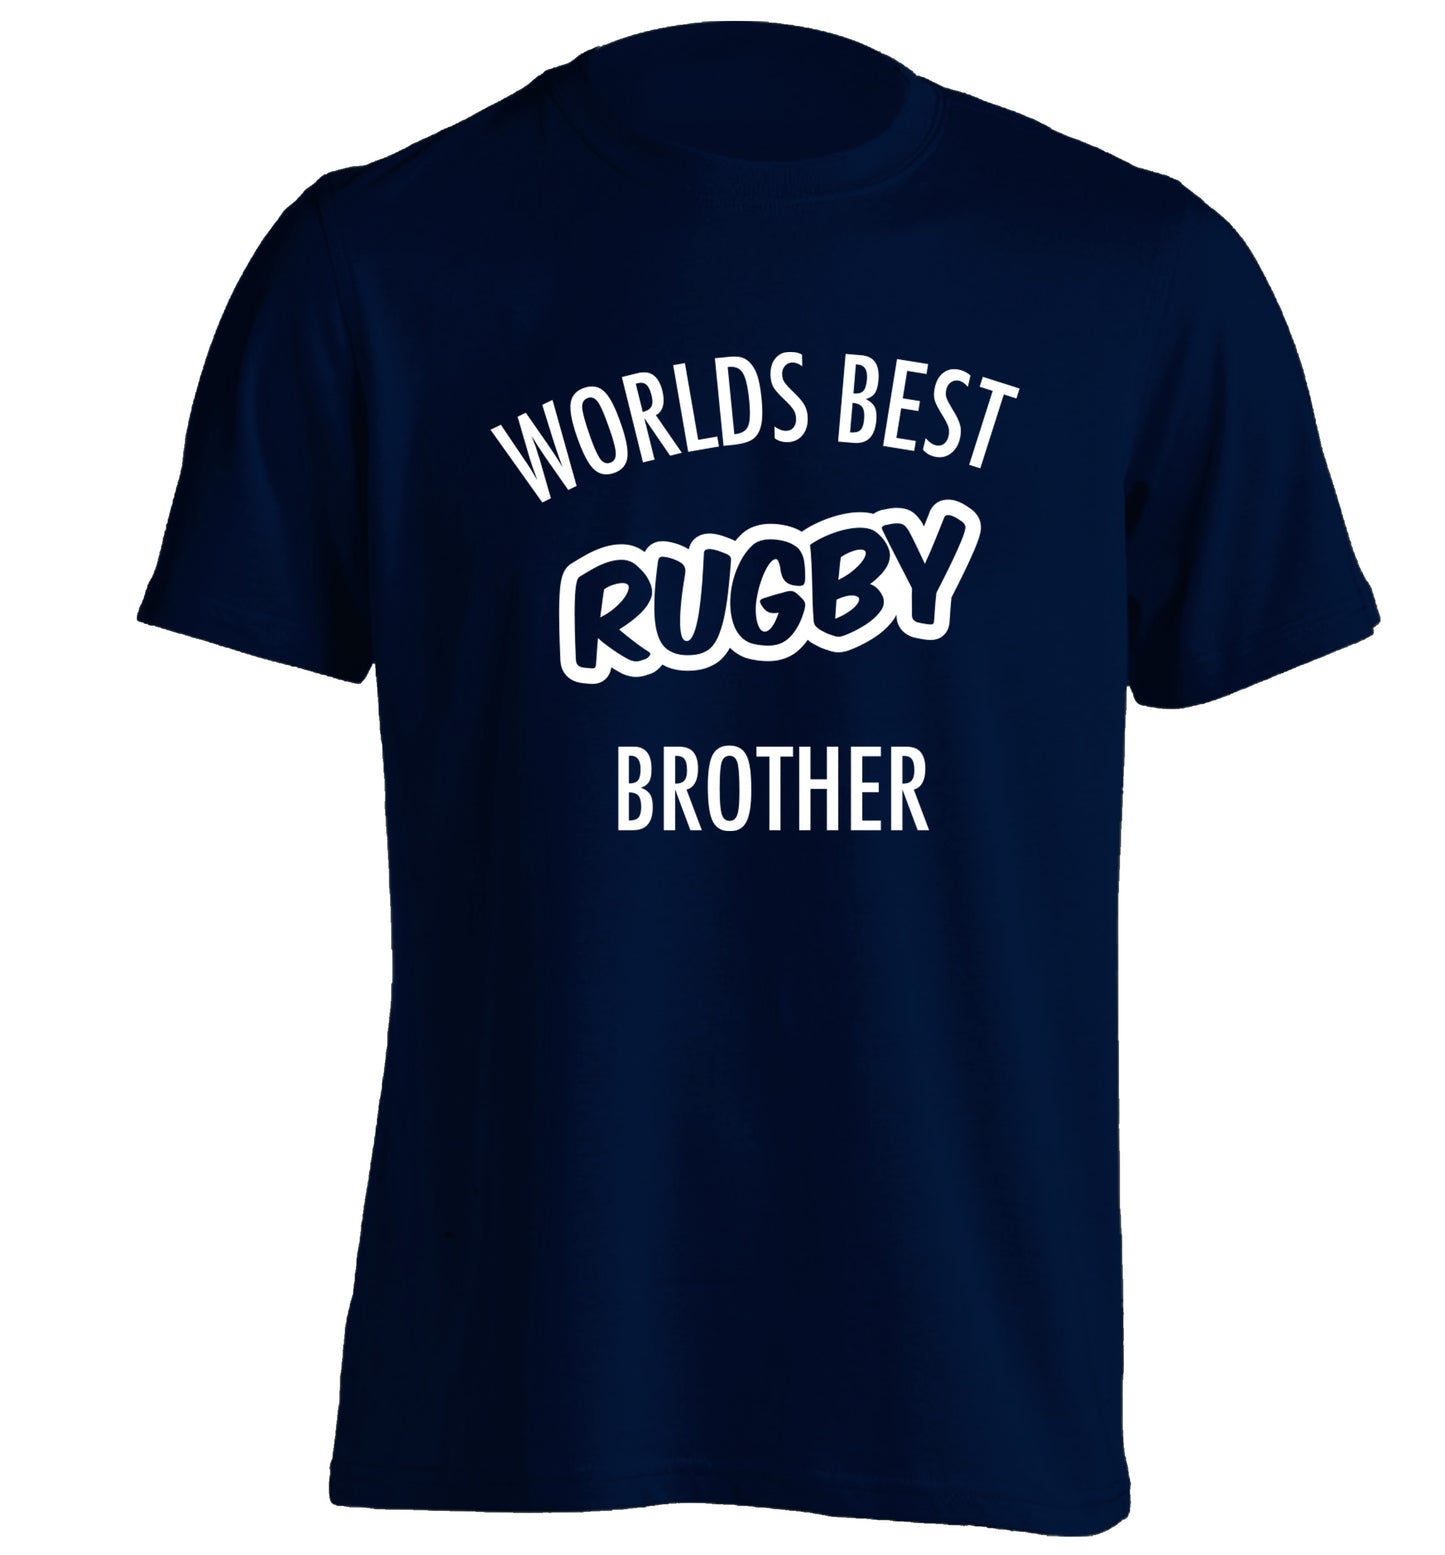 Worlds best rugby brother adults unisex navy Tshirt 2XL